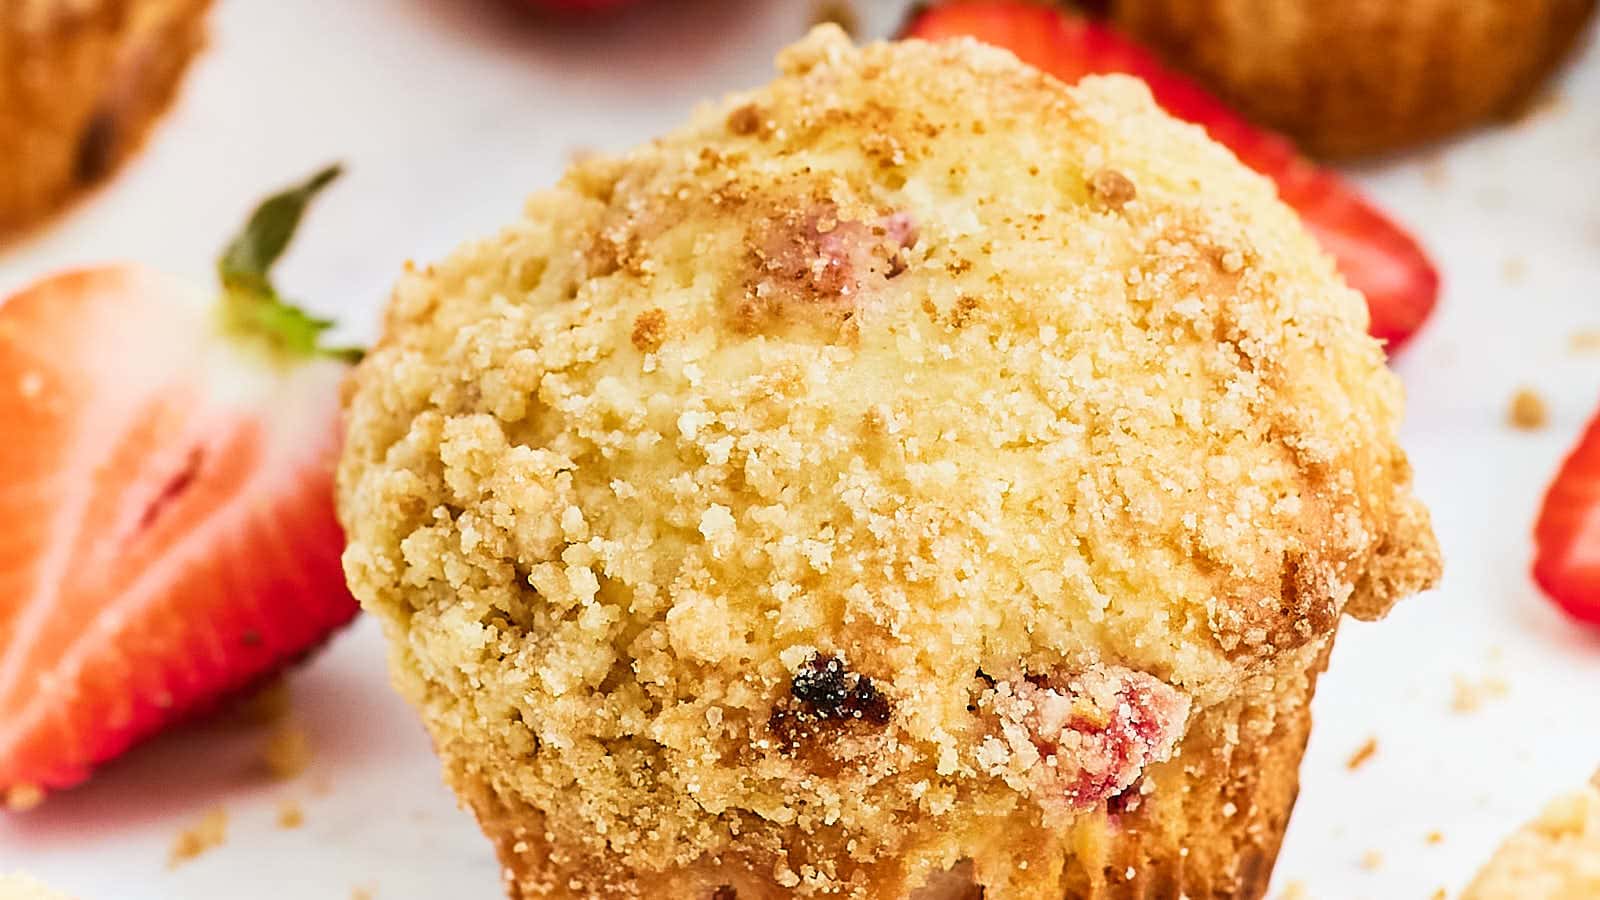 Strawberry Streusel Muffiins recipe by Cheerful Cook.